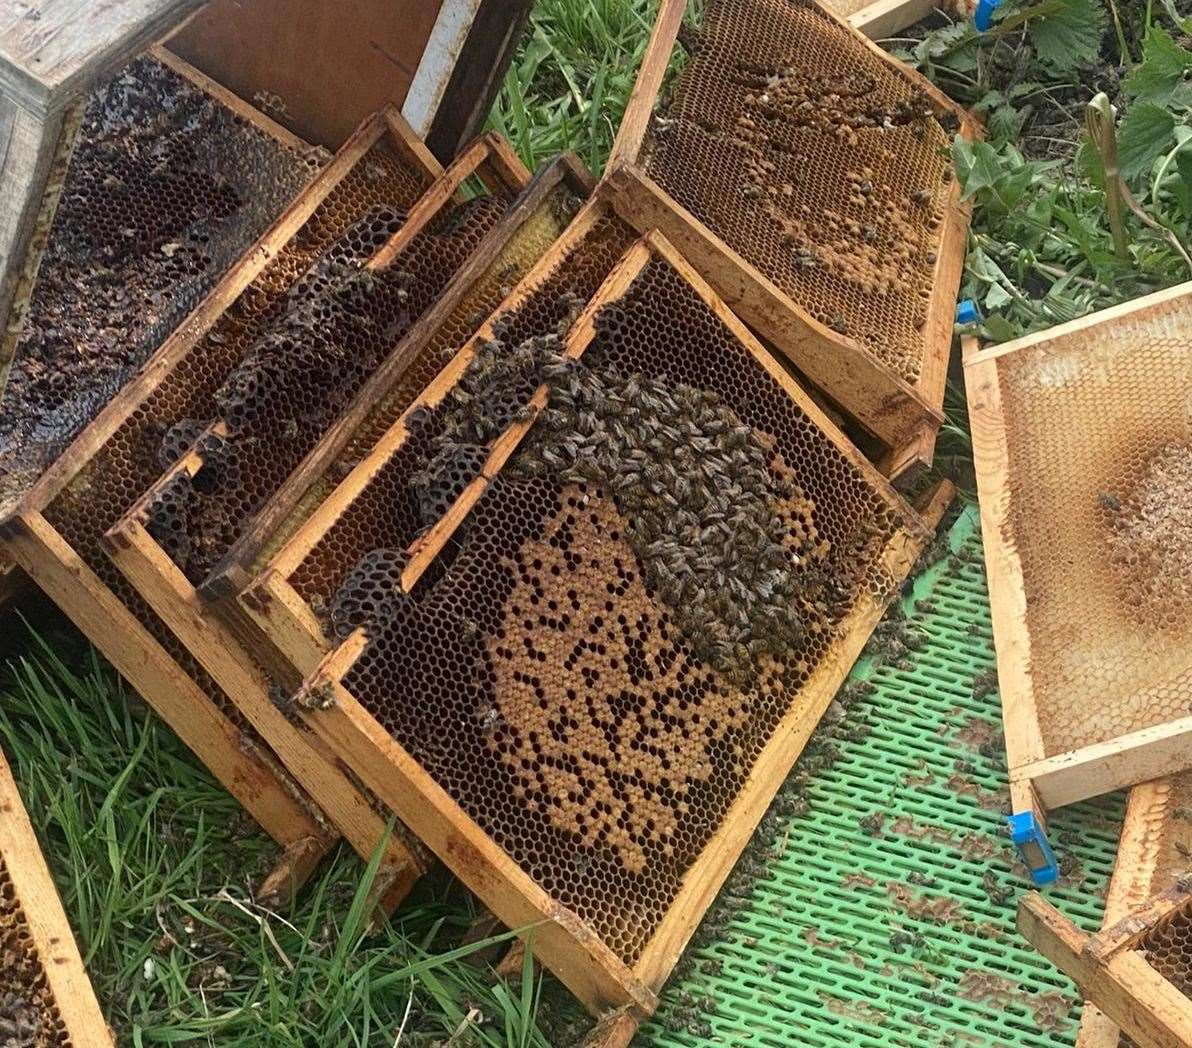 Some 30,000 bees have been affected. Picture: Michael Smith